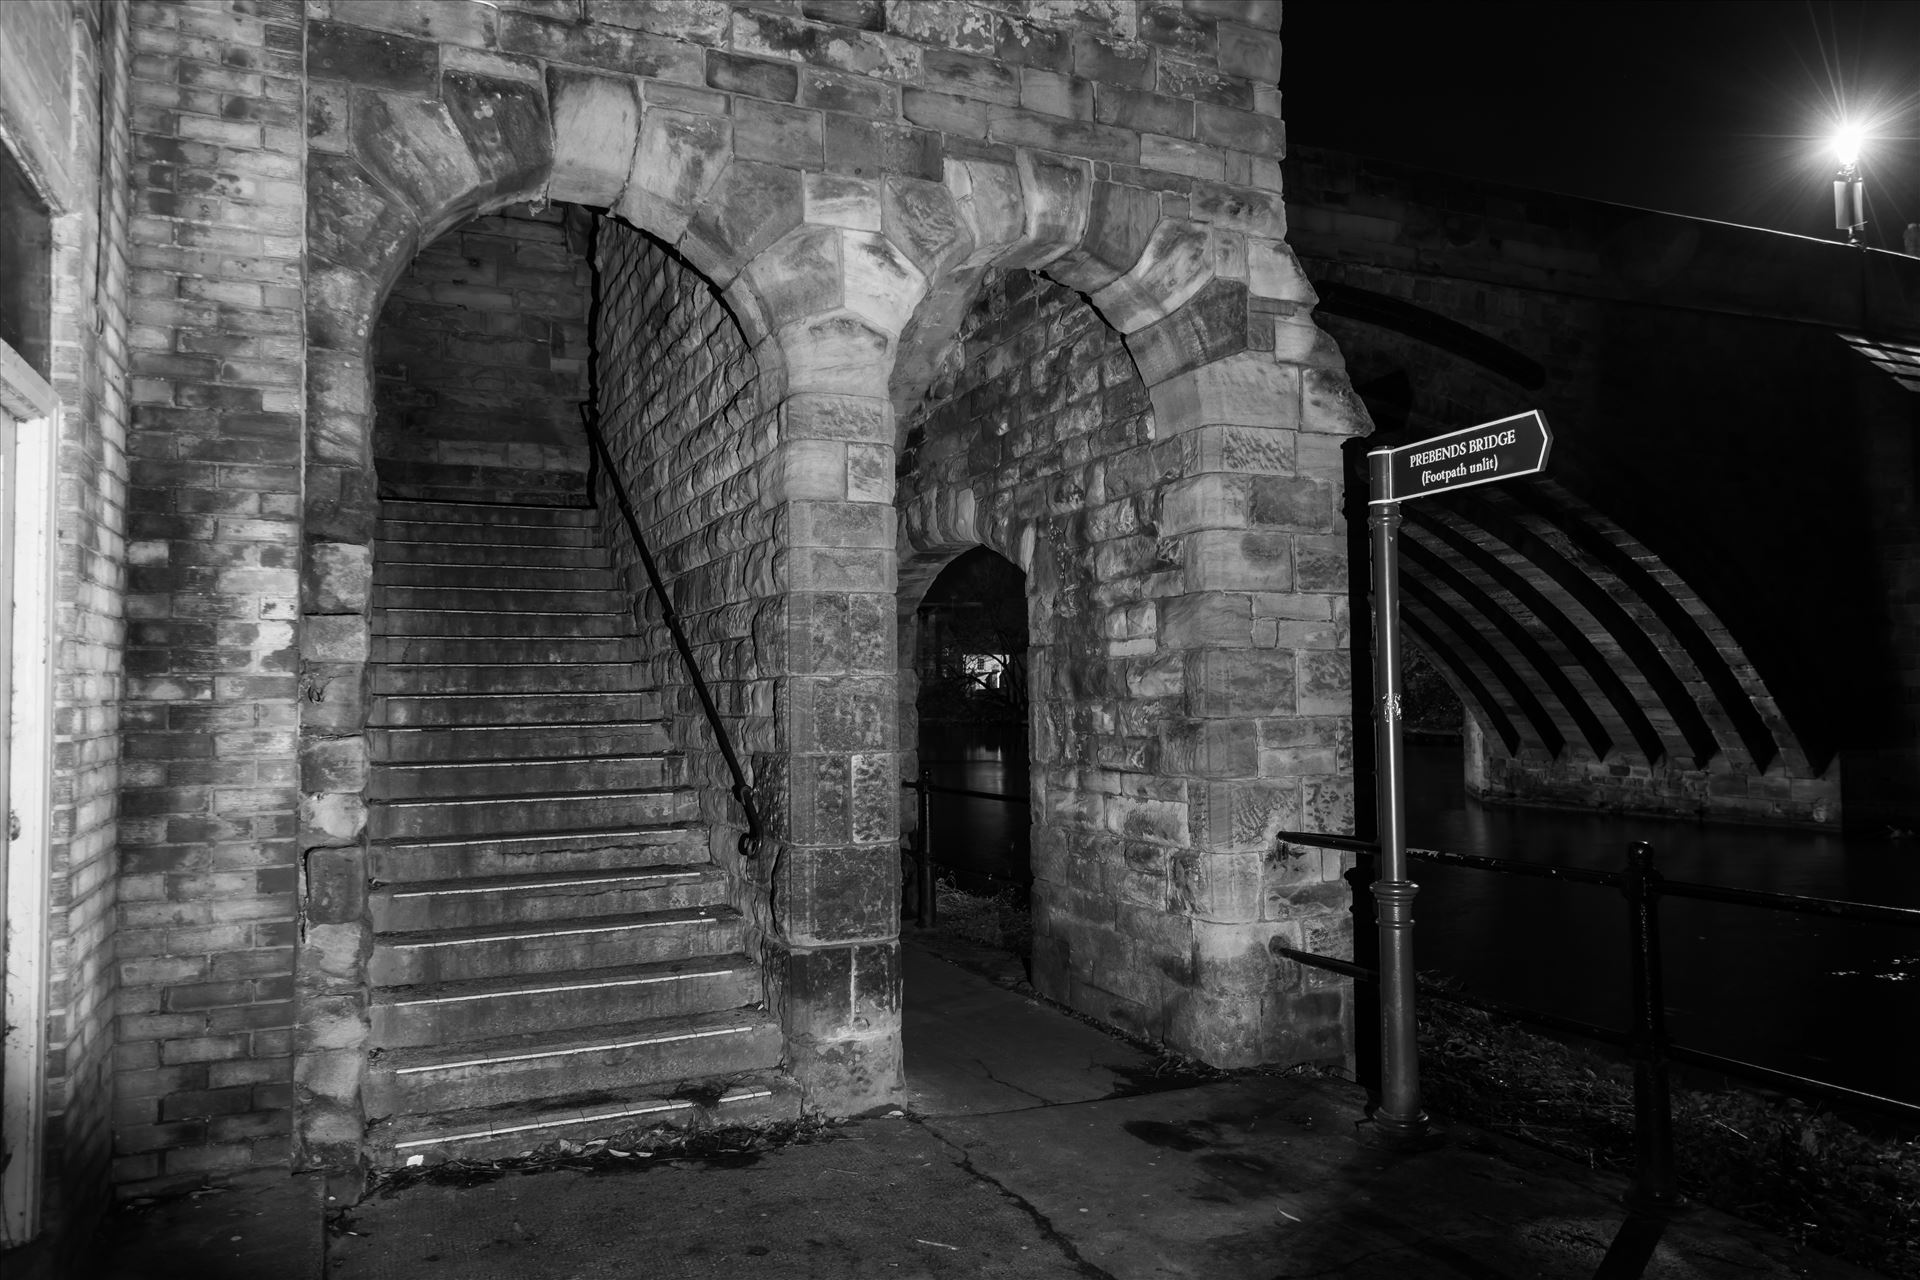 Stone arch & steps at Durham riverside  by philreay